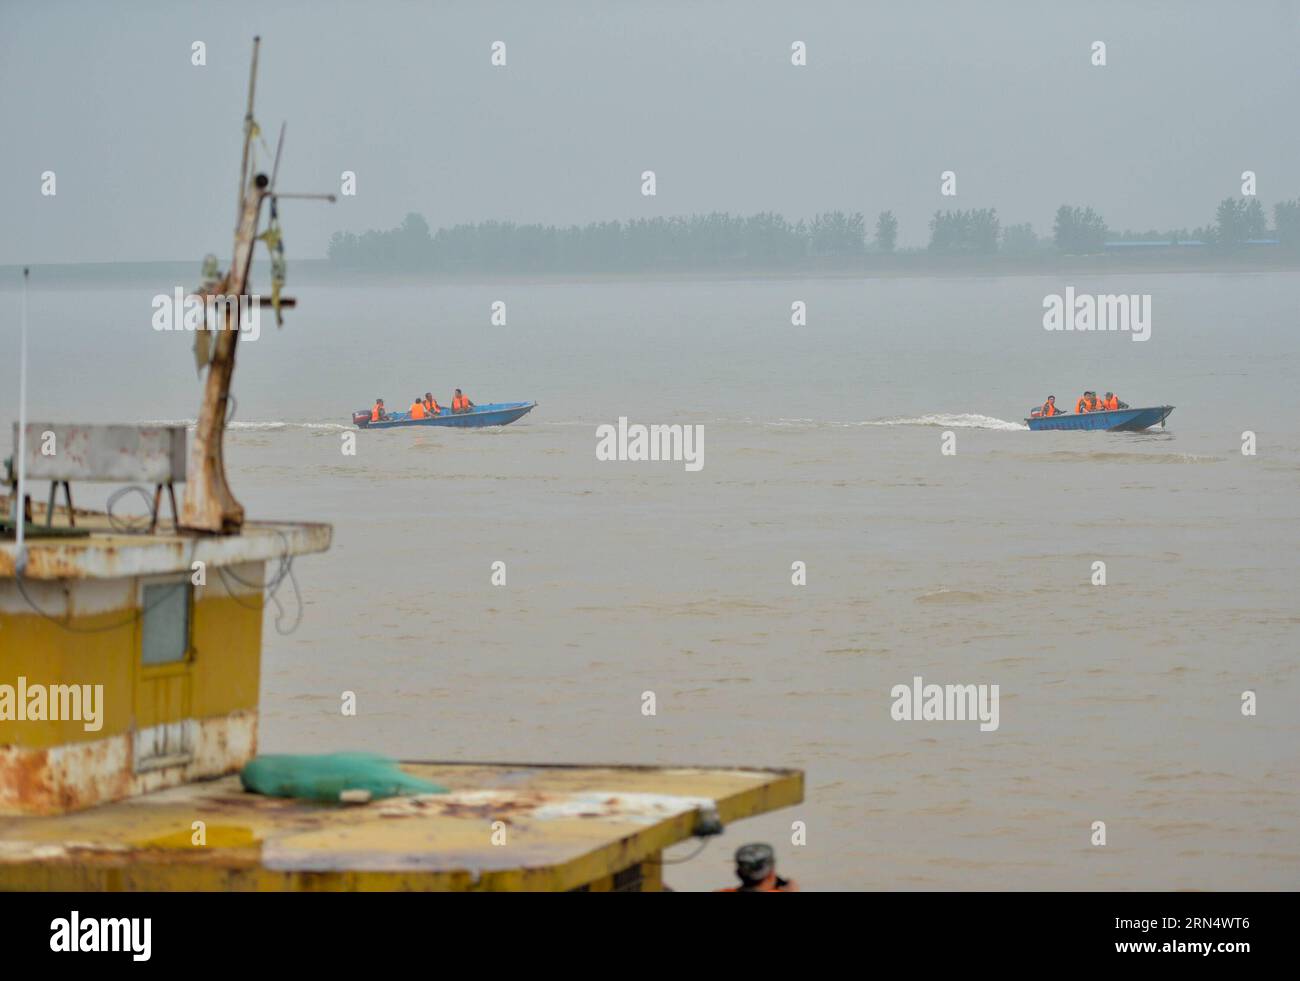 (150602) -- HUARONG, June 2, 2015 -- Rescuers in Yueyang City of central China s Hunan Province take speedboats to search for survivors of the passenger ship overturned in the Jianli section of the Yangtze River in neighboring central China s Hubei Province June 2, 2015. The ship, named Dongfangzhixing, or Eastern Star, sank at around 9:28 p.m. (1328 GMT) on Monday after being caught in a cyclone in the Jianli section of the Yangtze River. Carrying 406 passengers, five travel agency workers and 47 crew members, the ship was heading from Nanjing, capital of east China s Jiangsu Province, for so Stock Photo